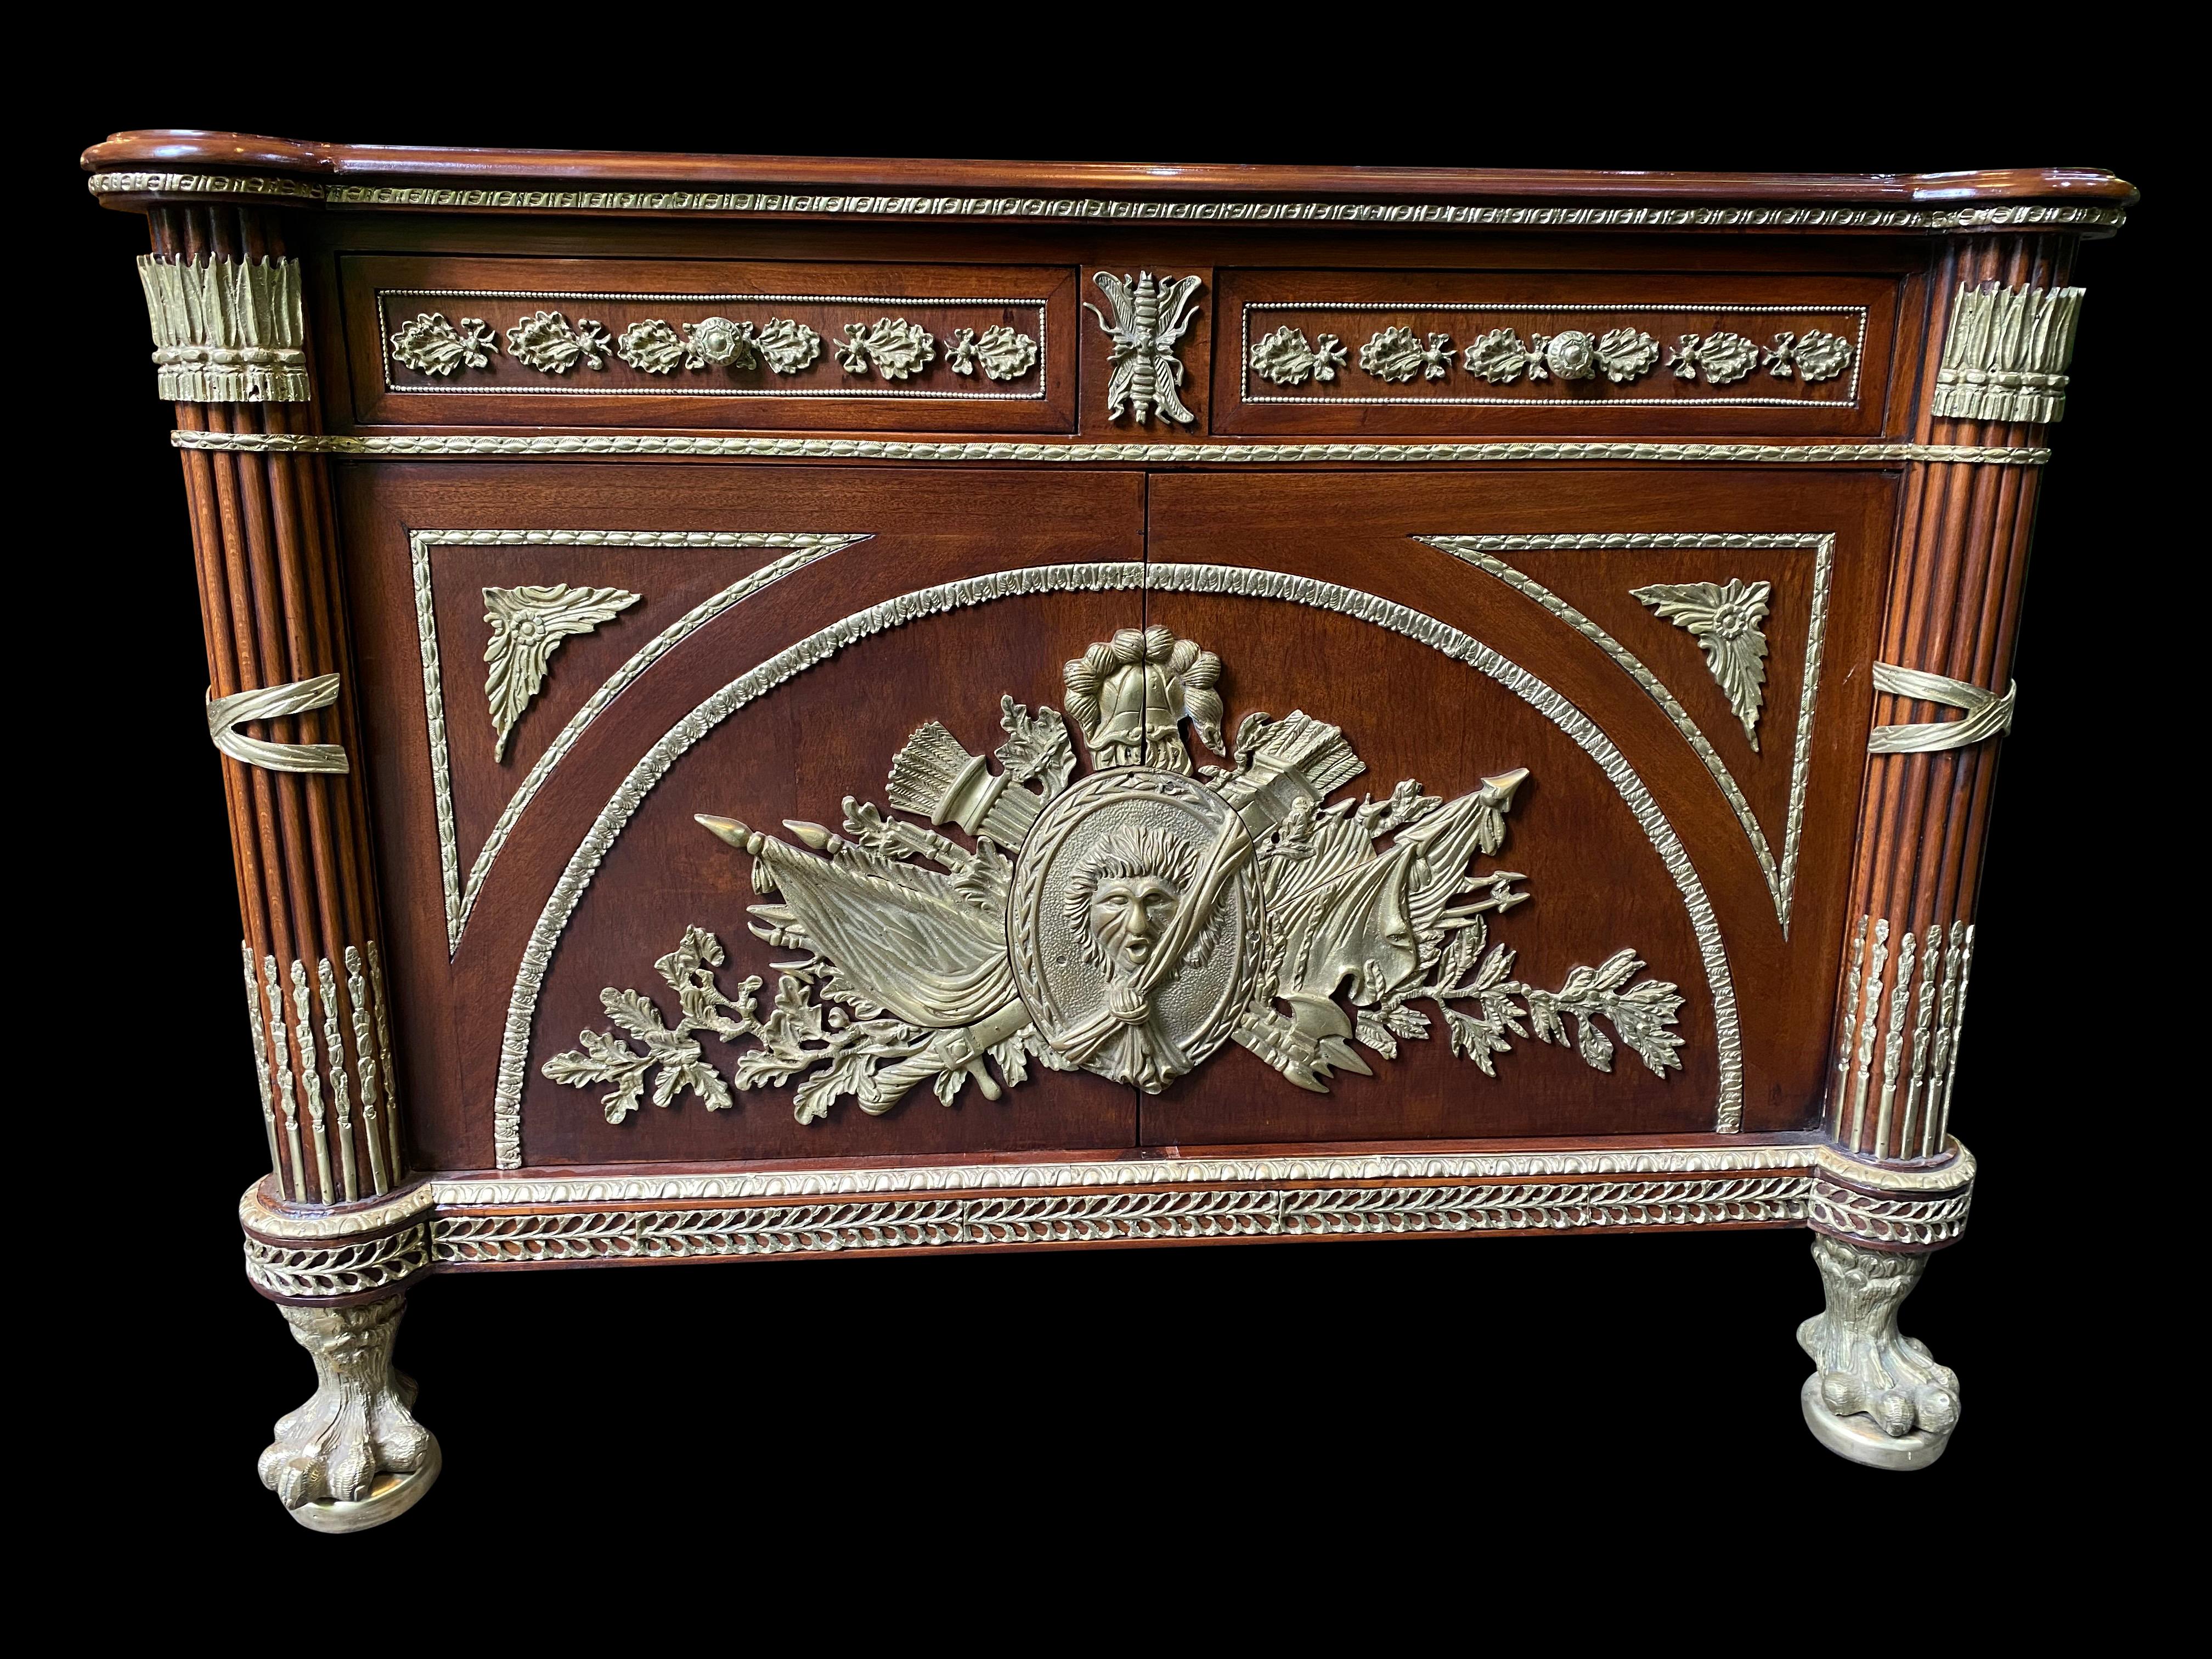 Large French mahogany Empire commode, with central coats of arms and lion paw feet, 20th century. Beautiful ormolu decoration with tall fluted carved columns. Perfect home decoration.